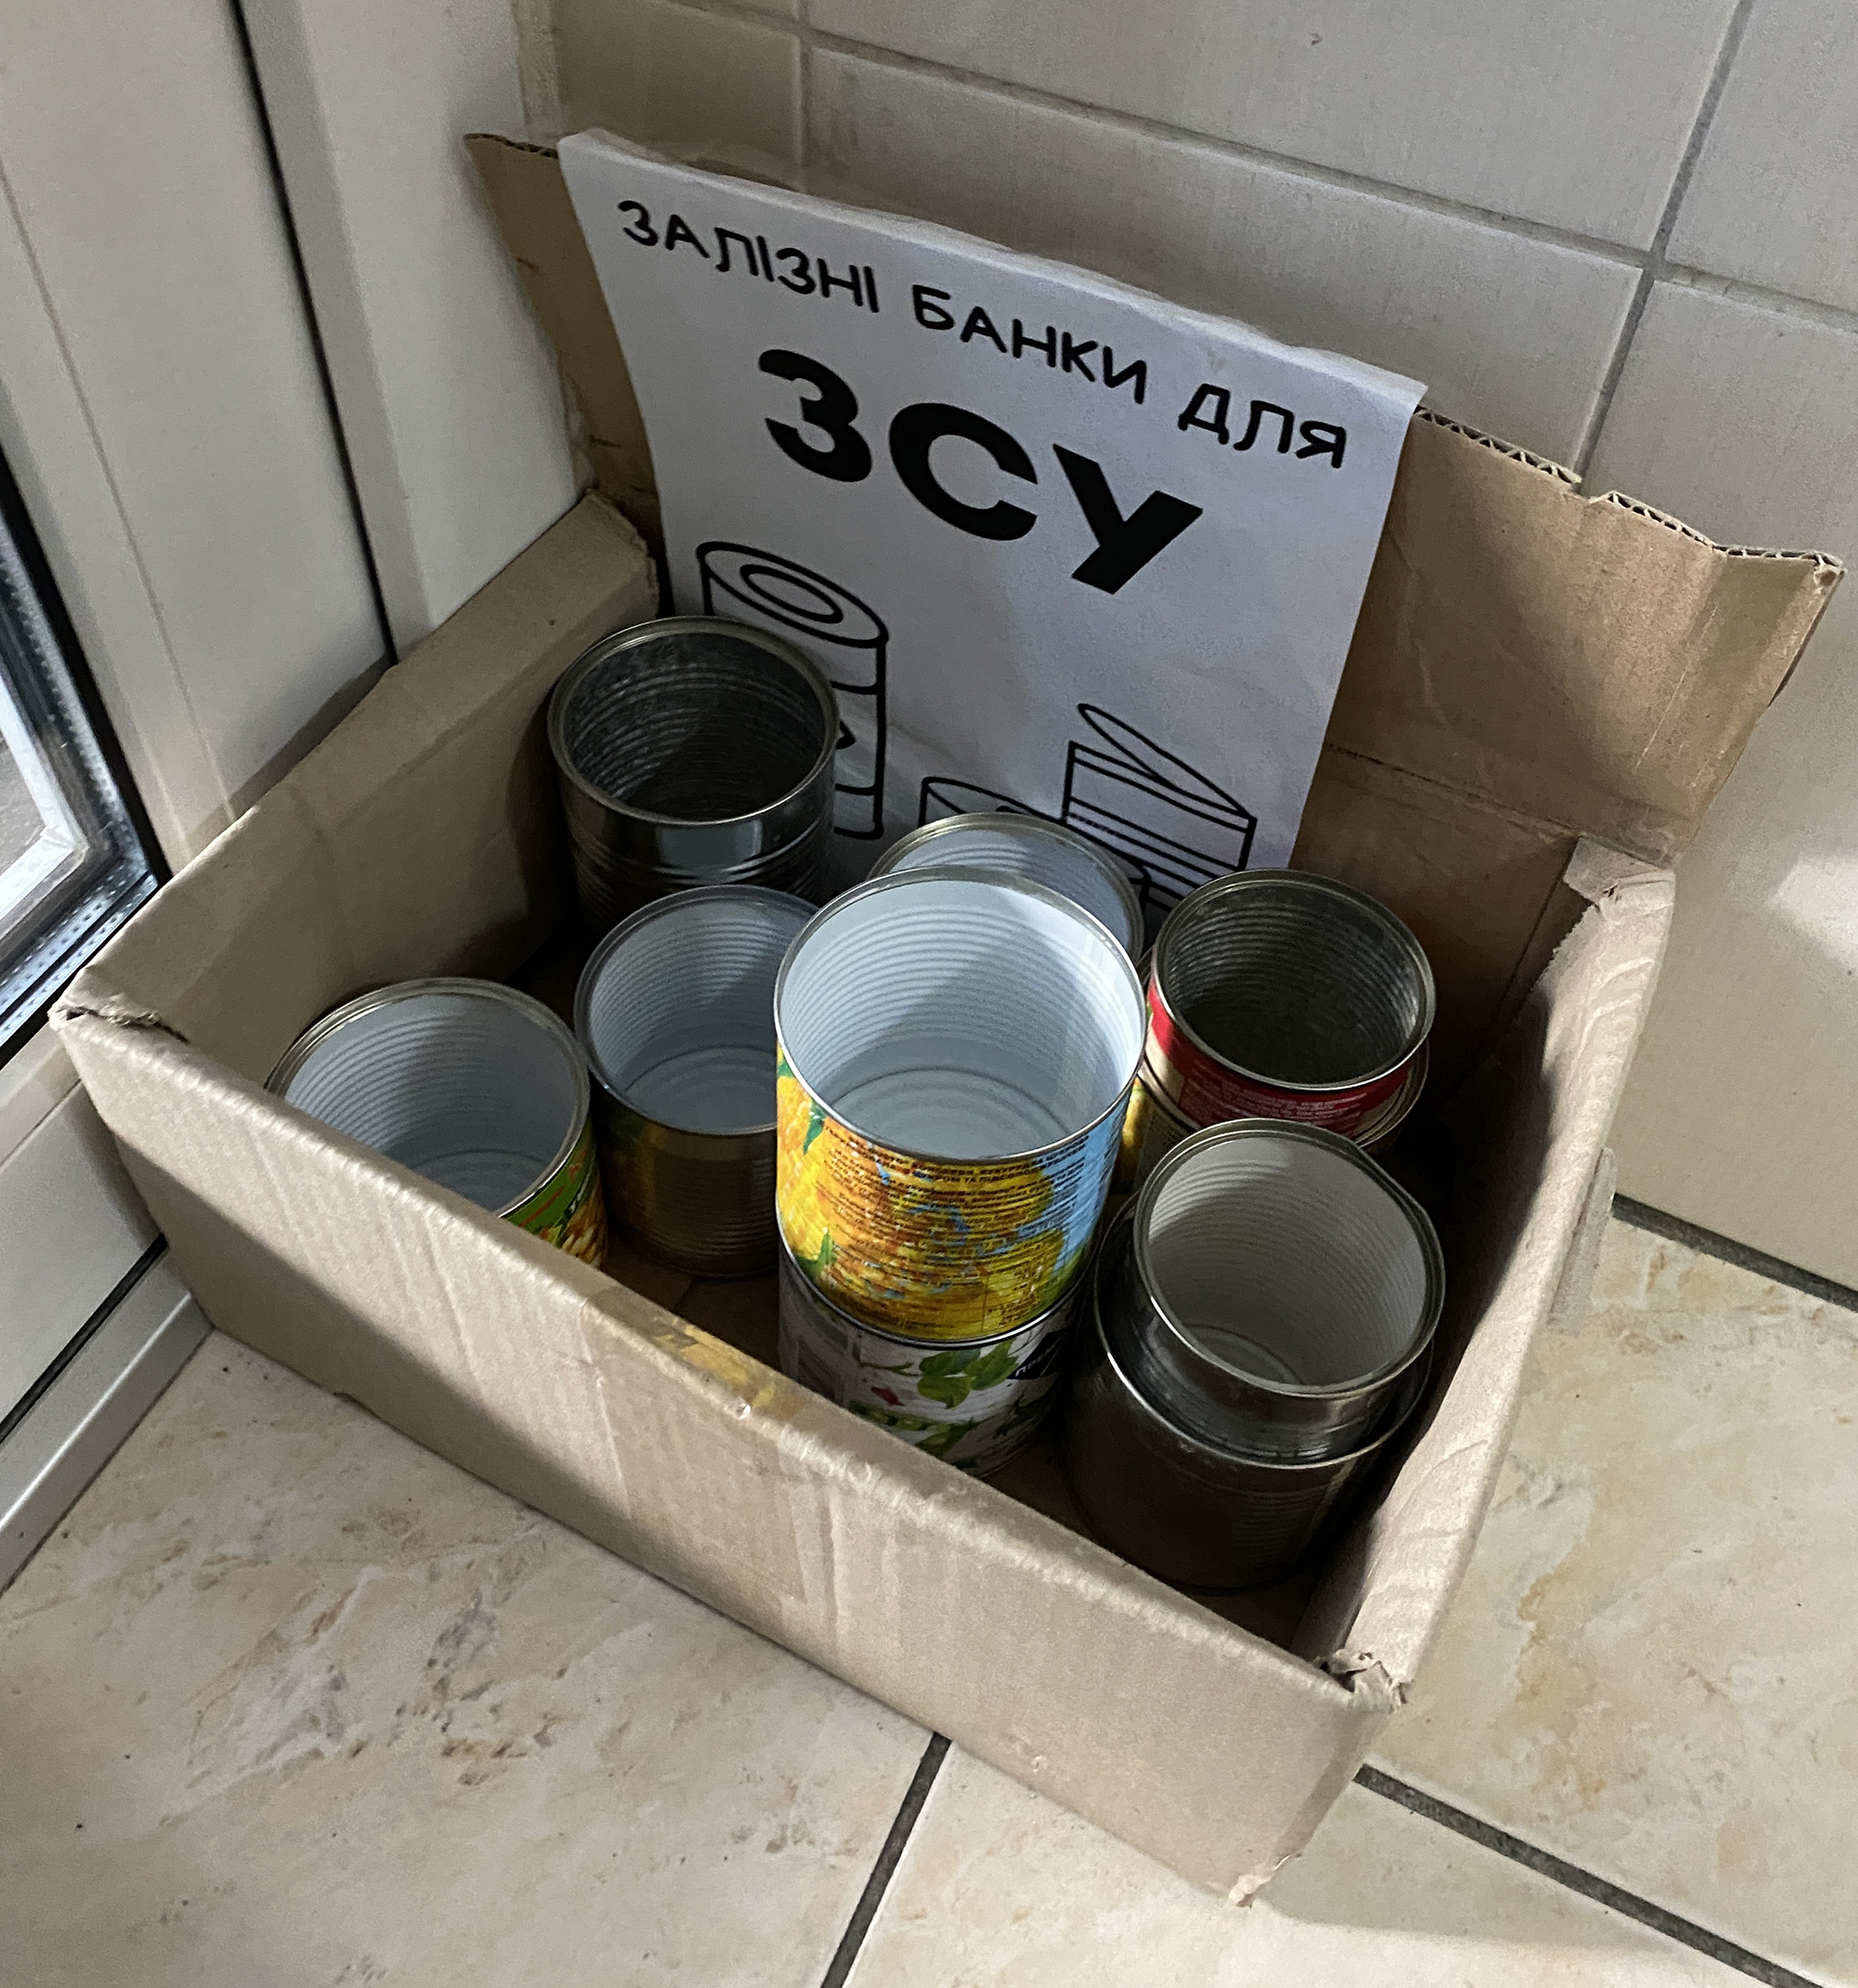 A collection point for tins; the sign says “Cans for AFU” (Armed Forces of Ukraine)